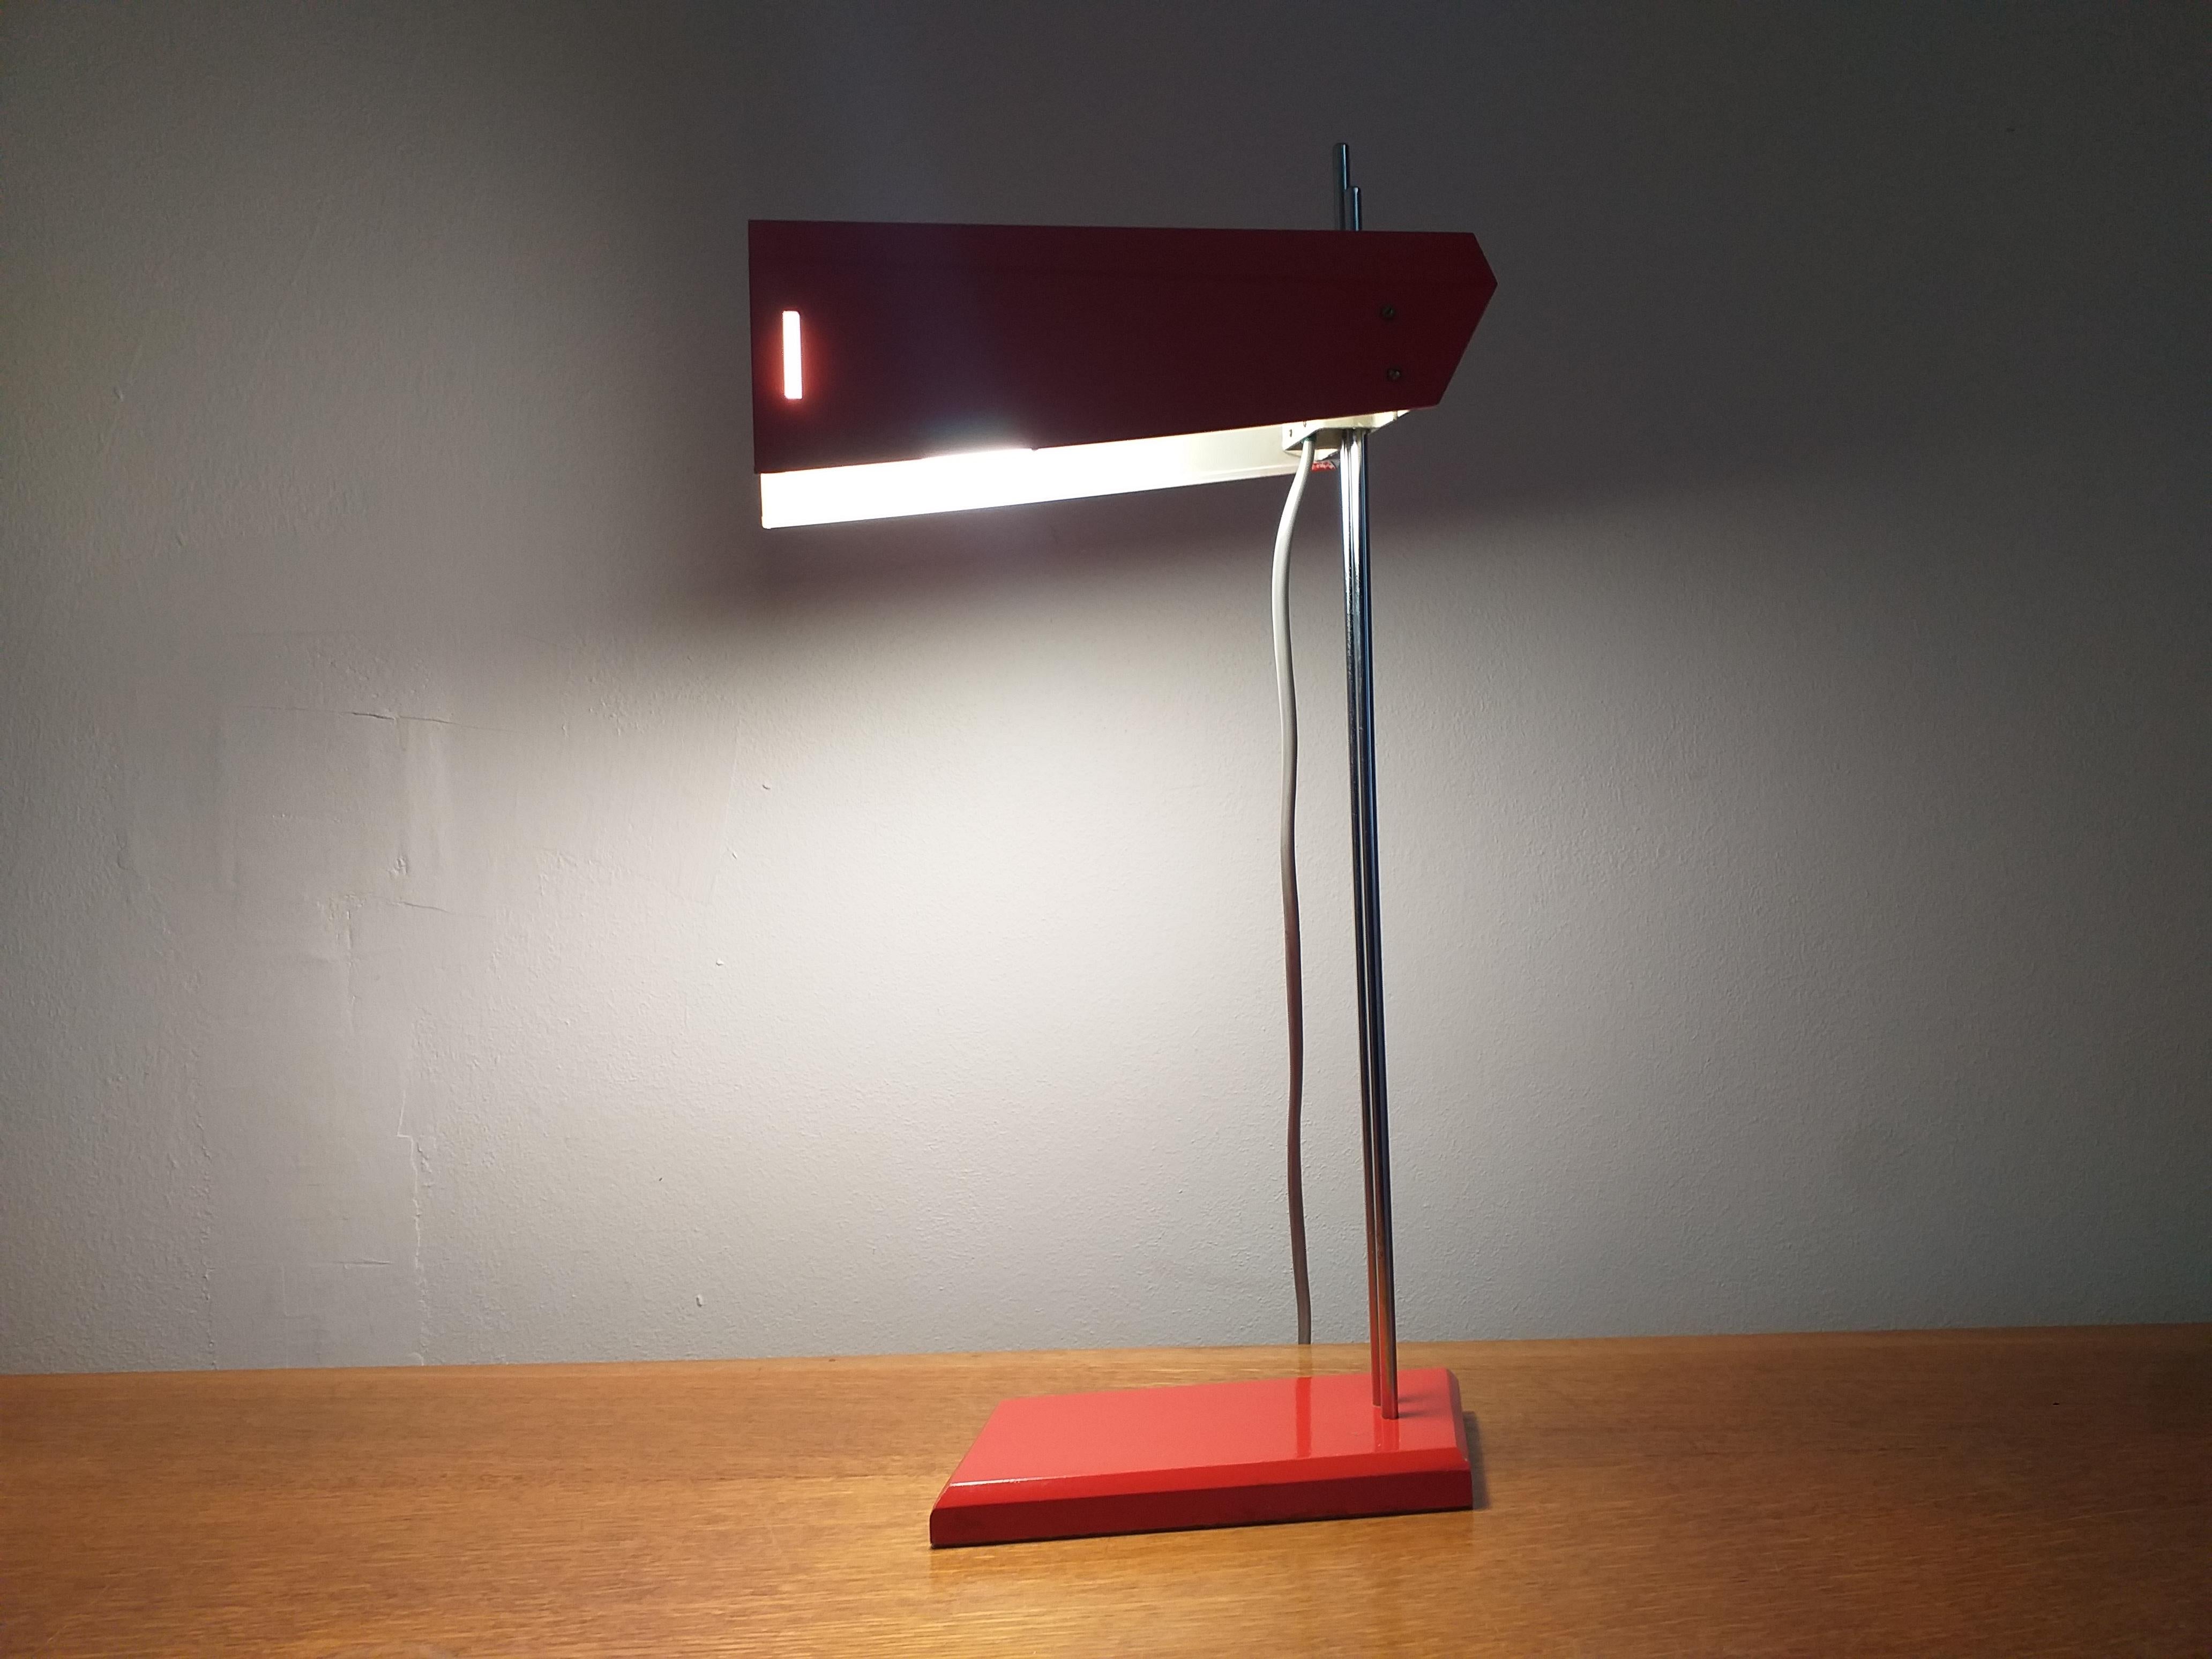 Midcentury Table Lamp Lidokov Designed by Josef Hurka, 1970s For Sale 1